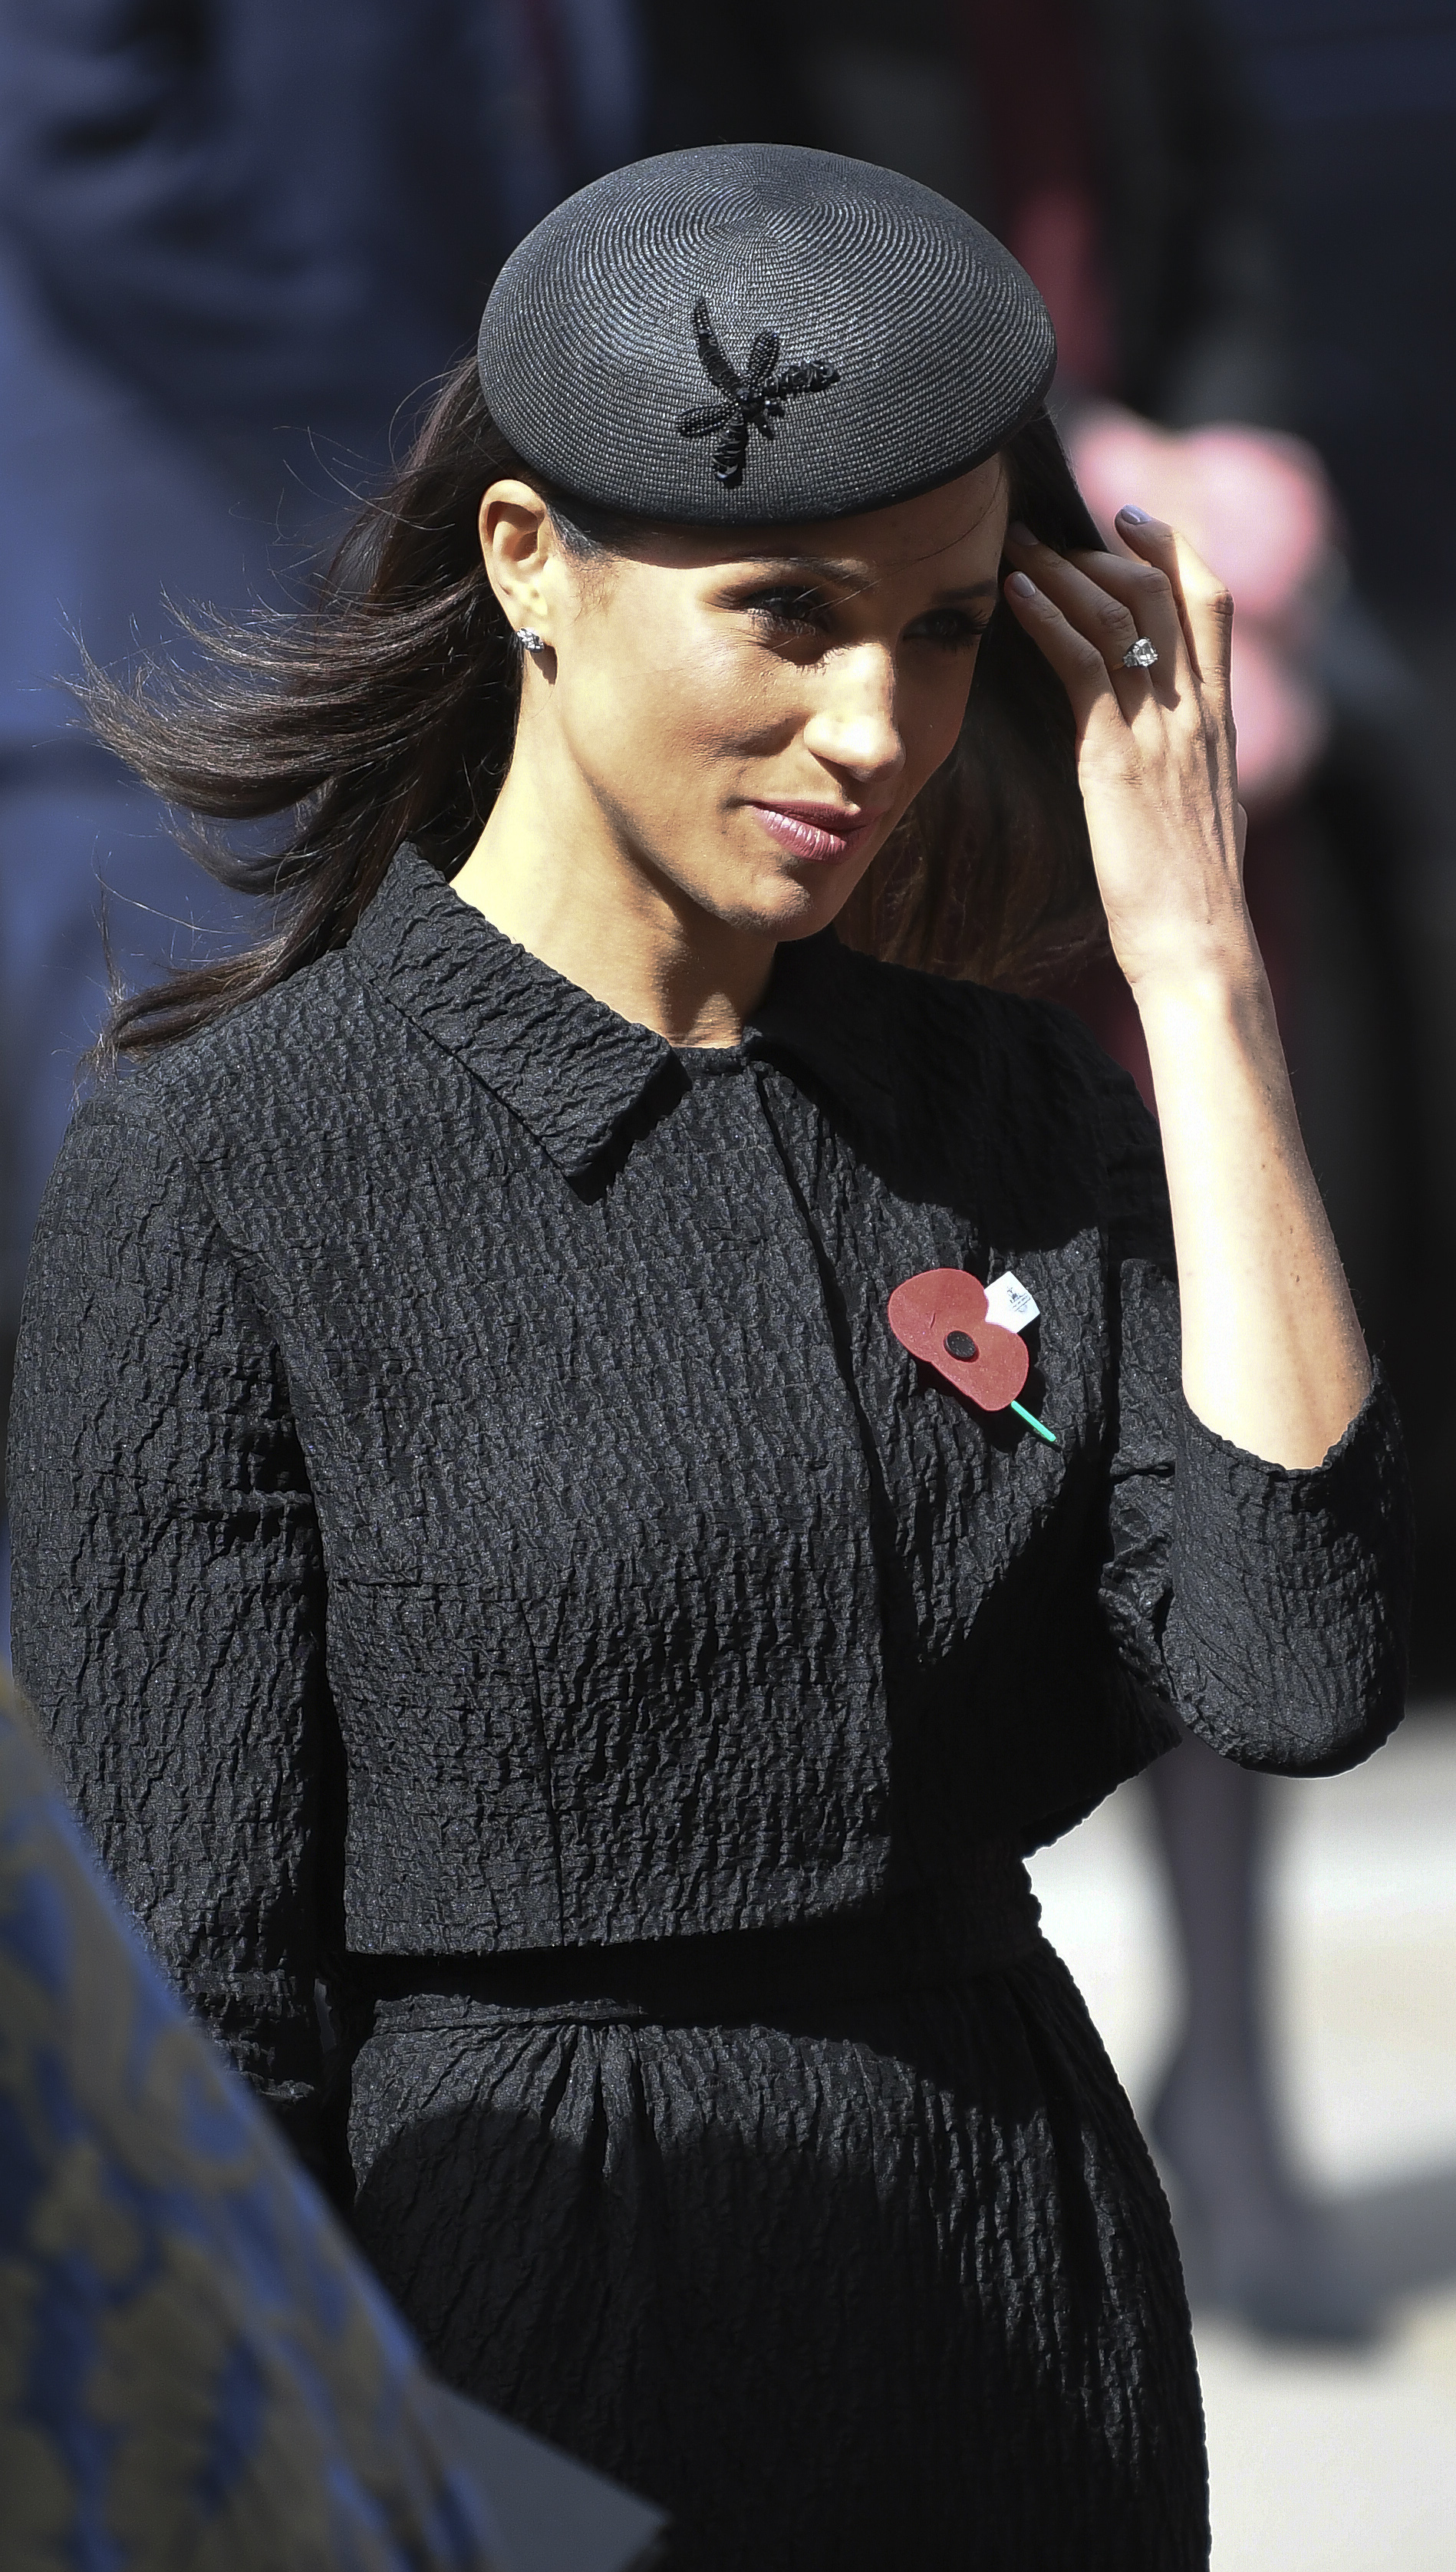 Meghan Markle attends an Anzac Day service at Westminster Abbey on April 25, 2018 in London, England. | Source: Getty Images